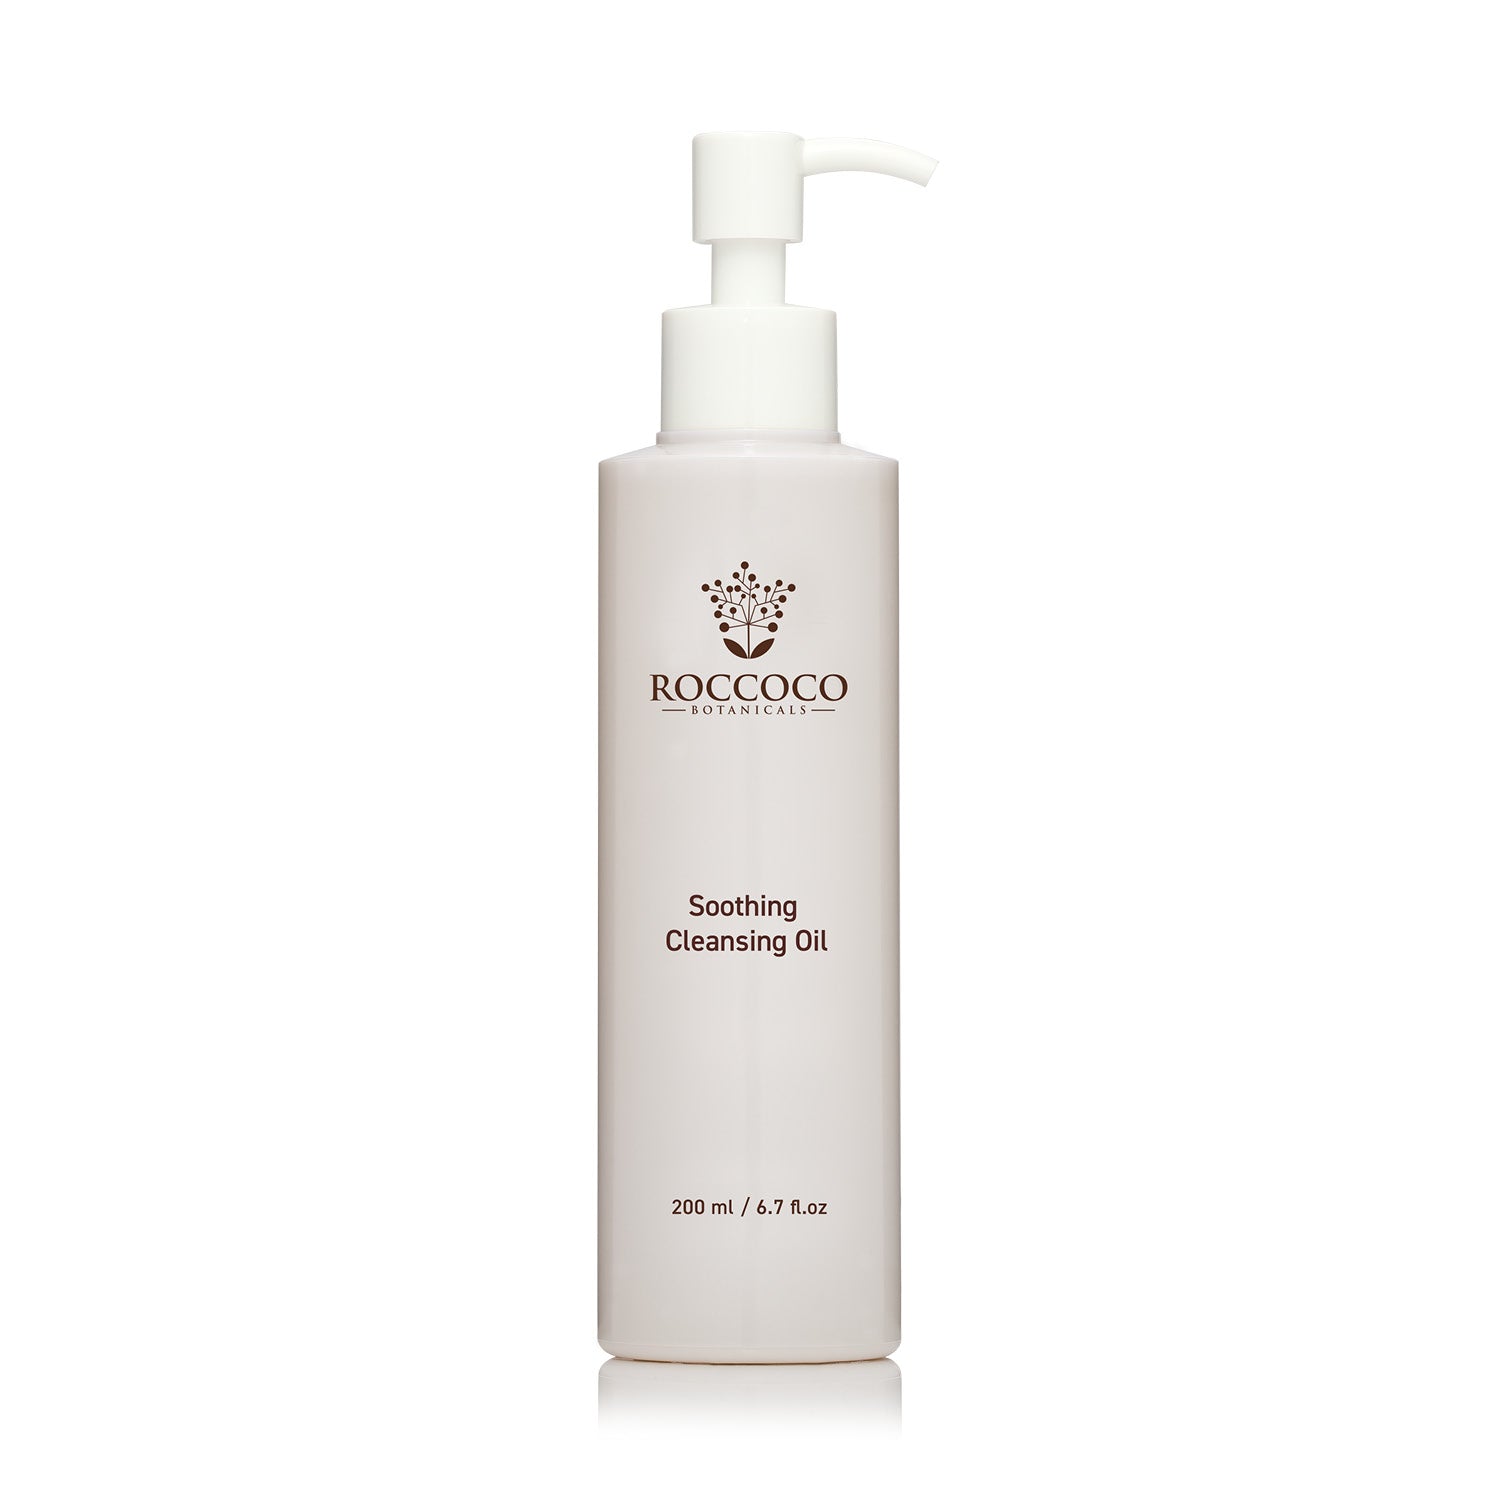 Roccoco Botanicals Soothing Cleansing Oil - Click to Buy!